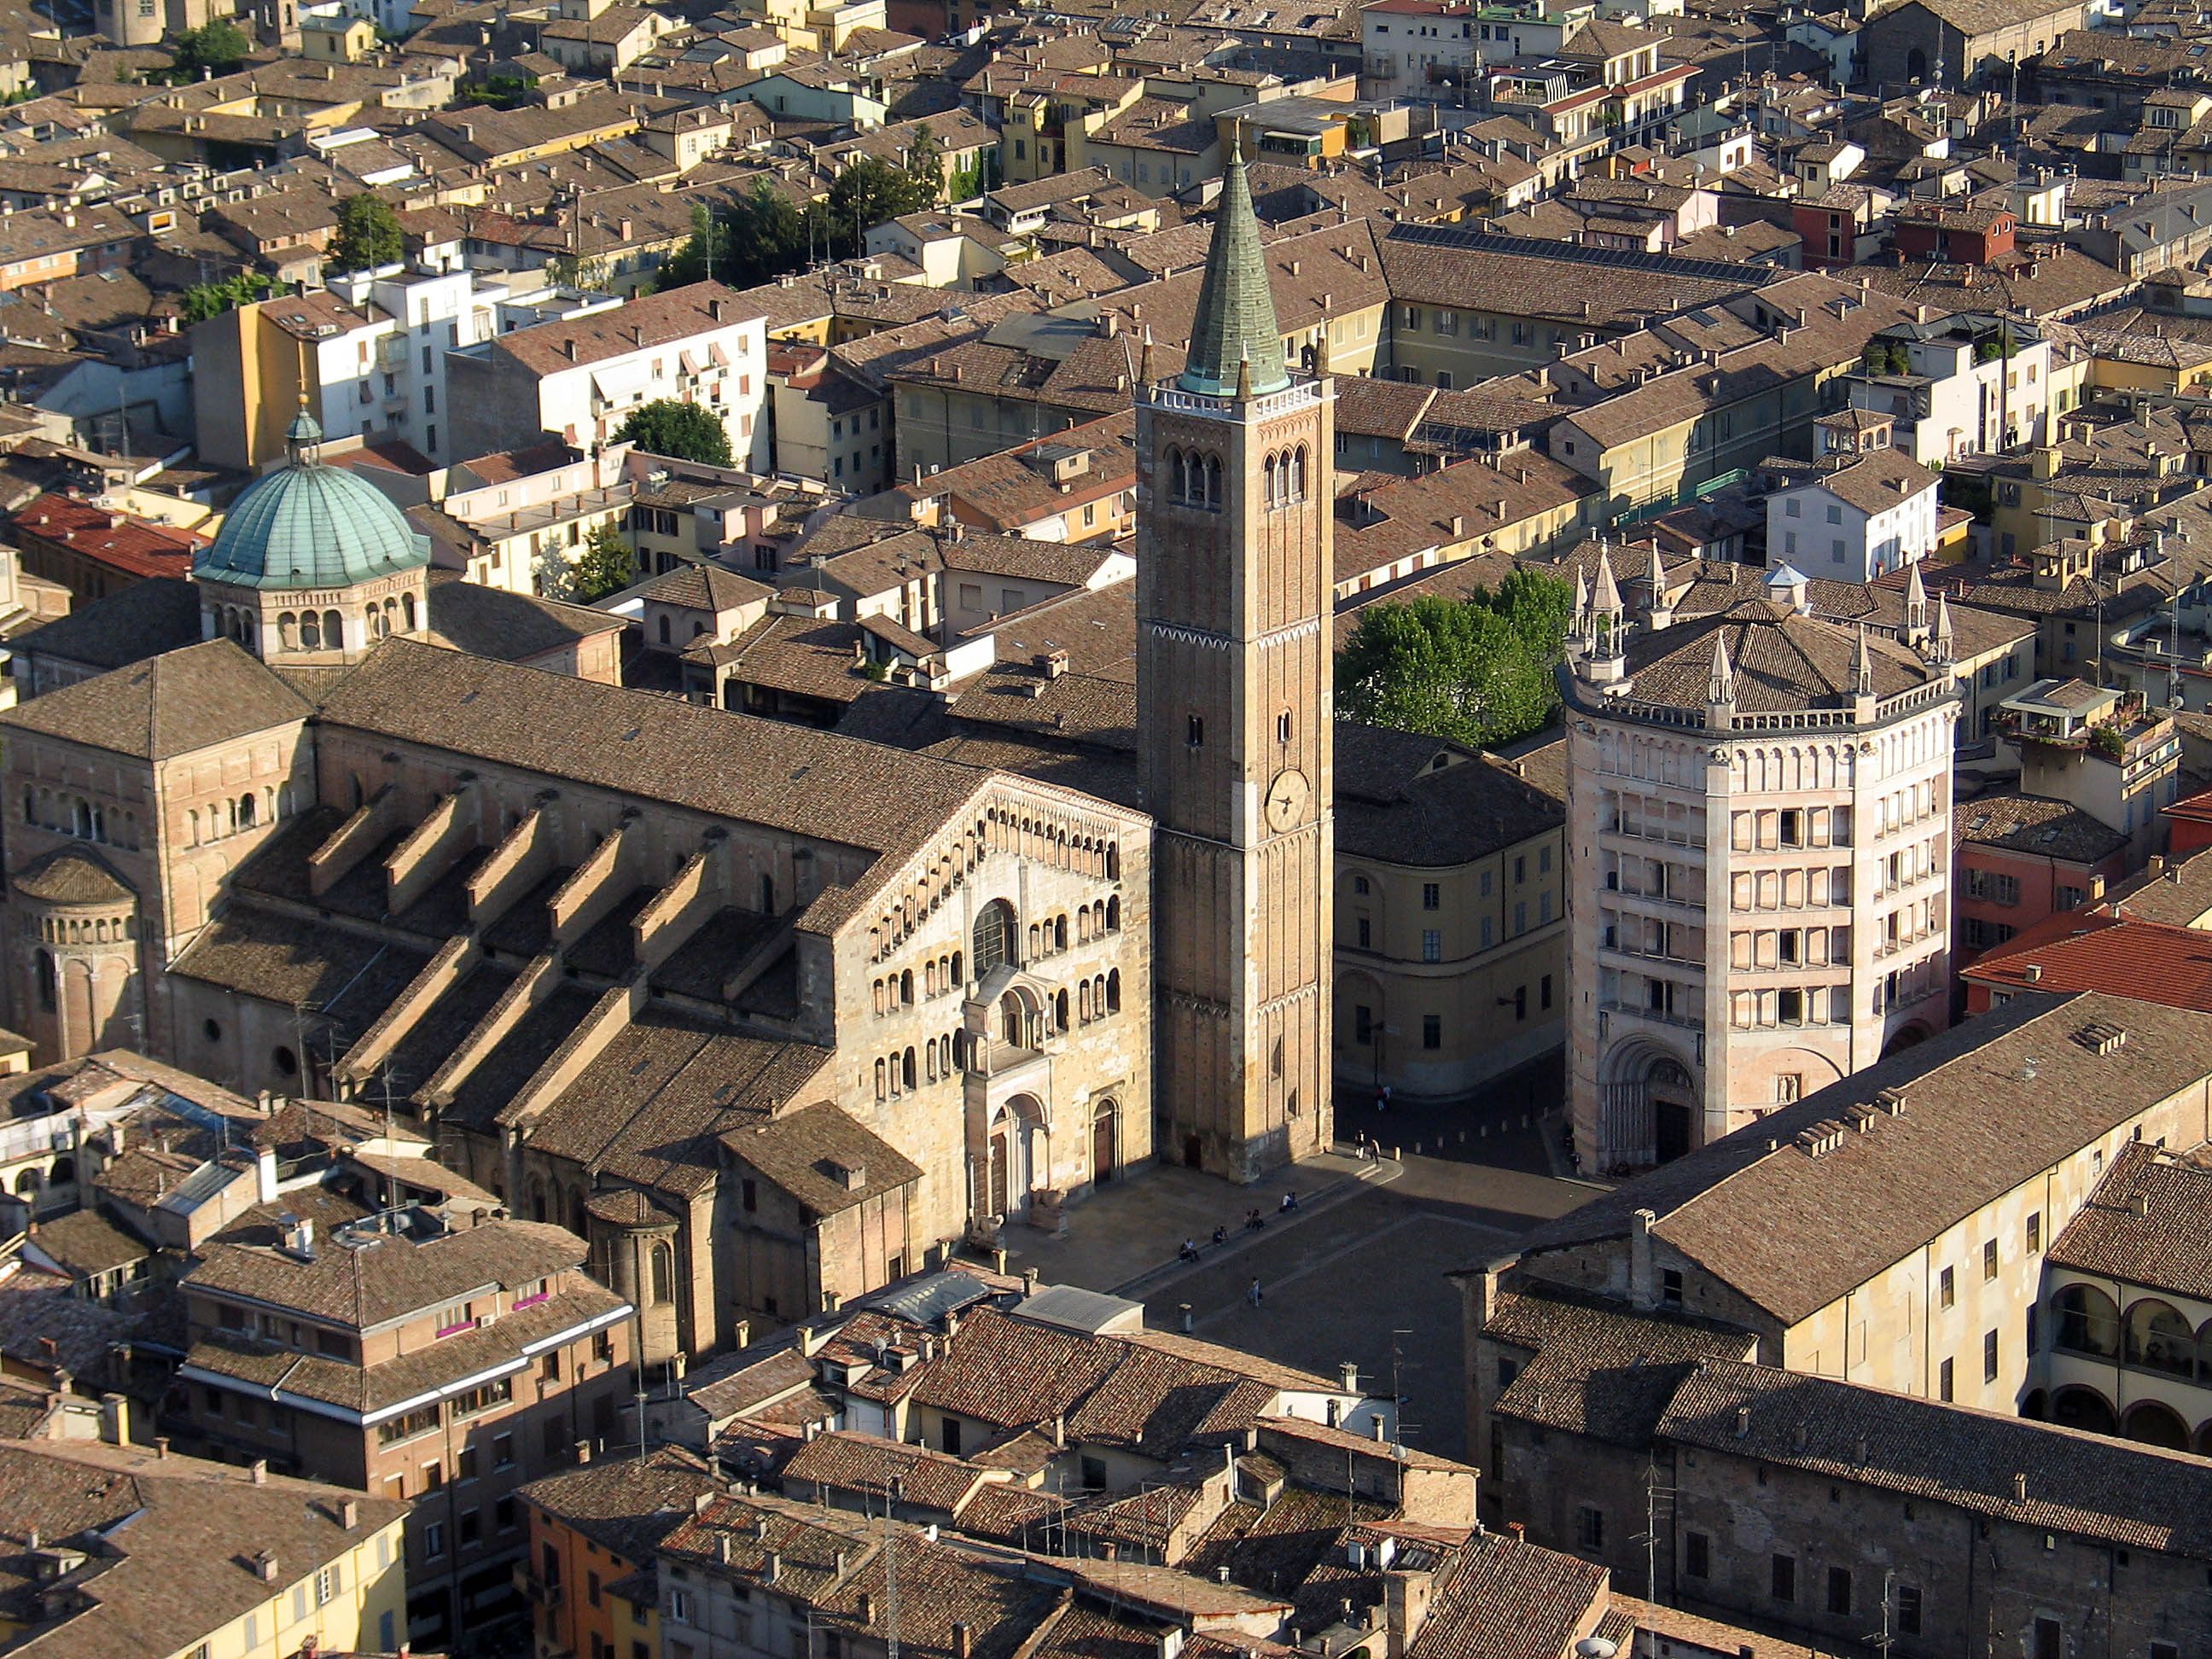 City of Parma, Italy wallpaper and image, picture